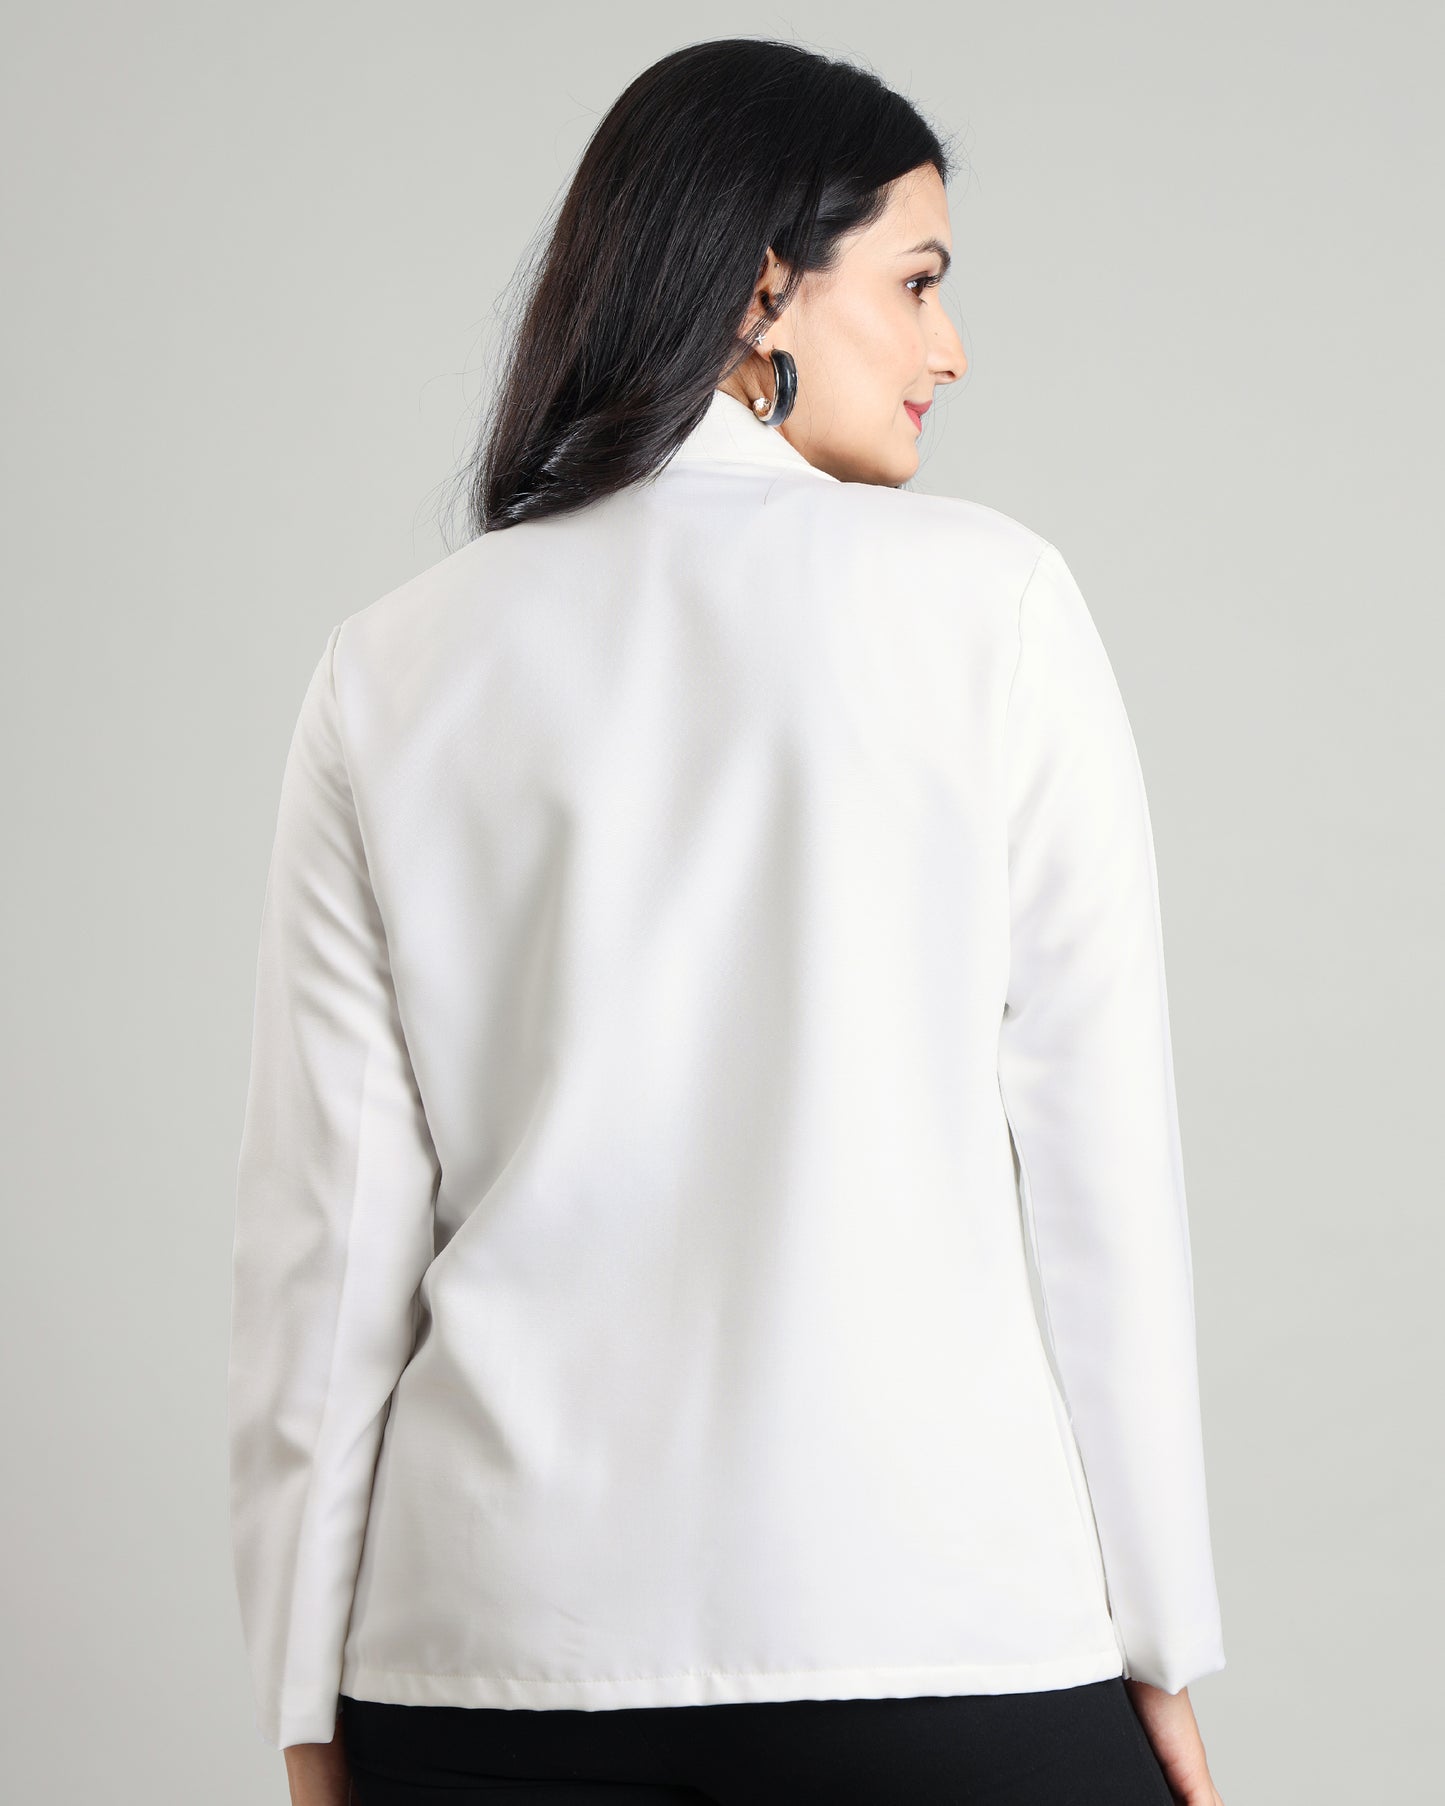 White With A Wink: The Playful Jacket